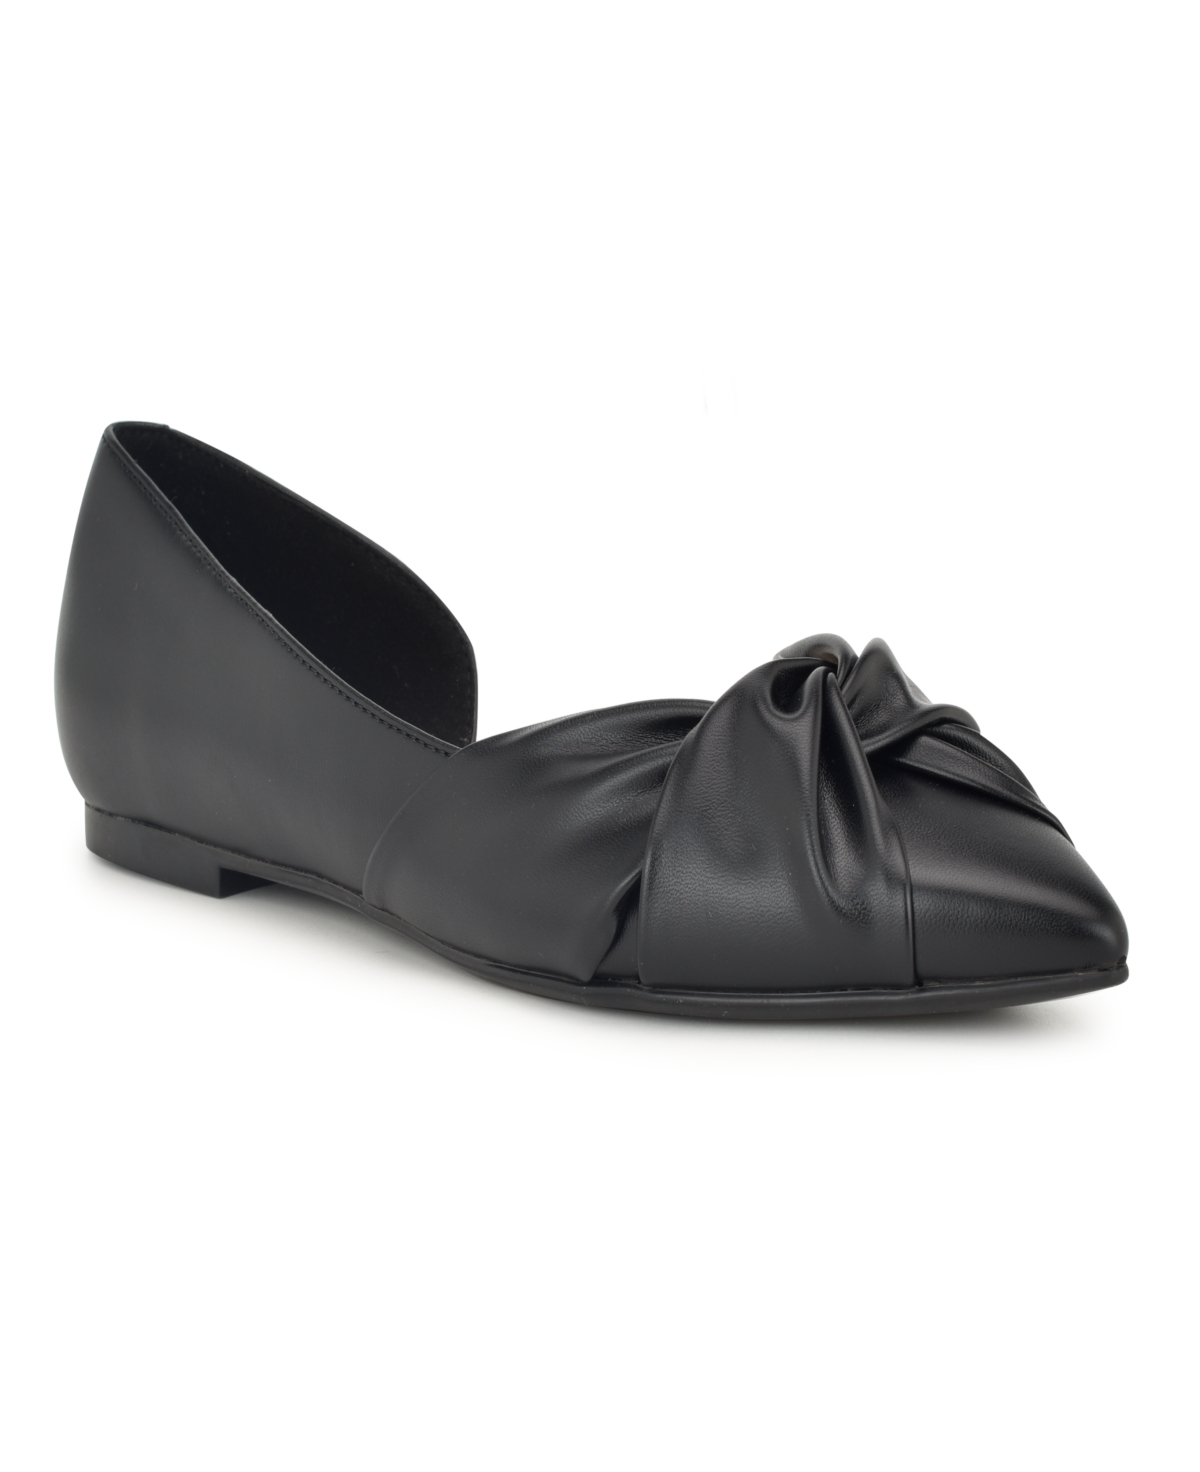 Nine West Lallin Pointed Toe Flat In Black - Faux Leather